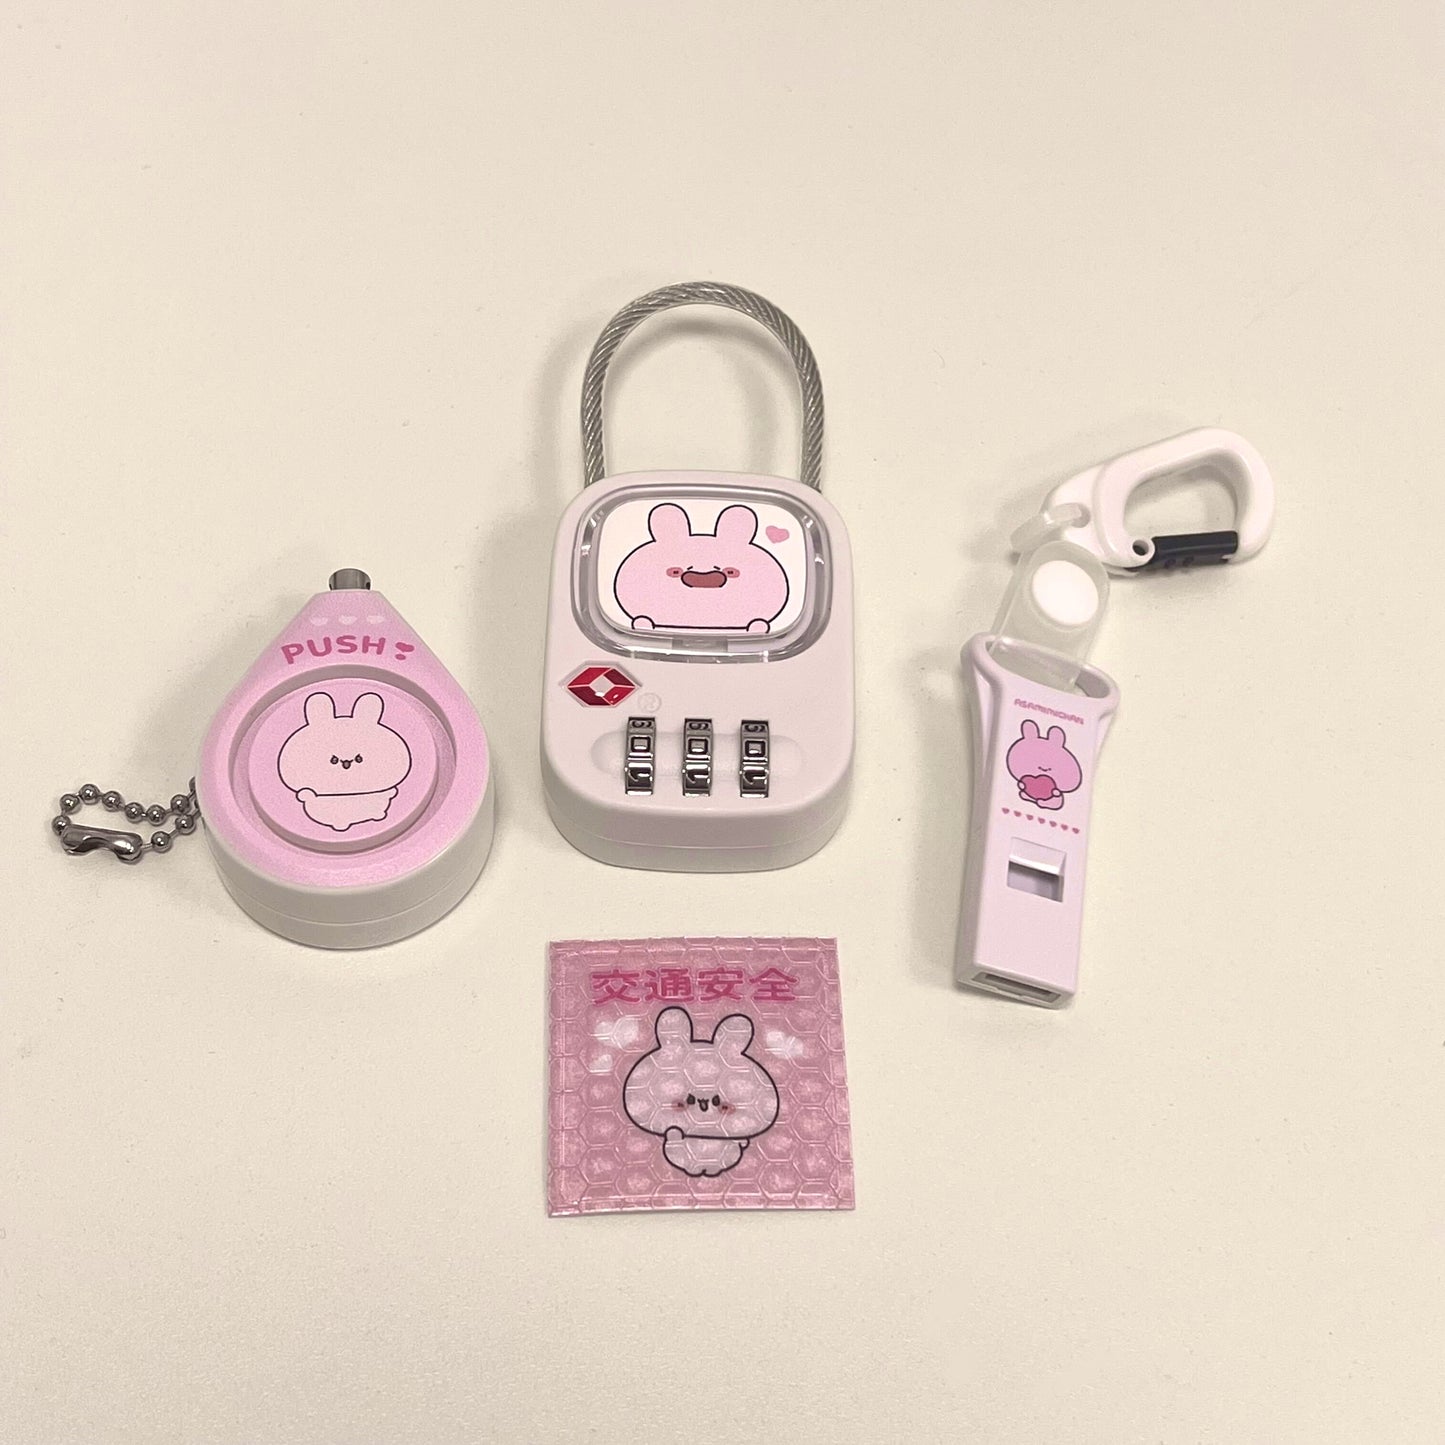 [Asamimi-chan] Security buzzer (protect you! Series) [Shipped in mid-March]